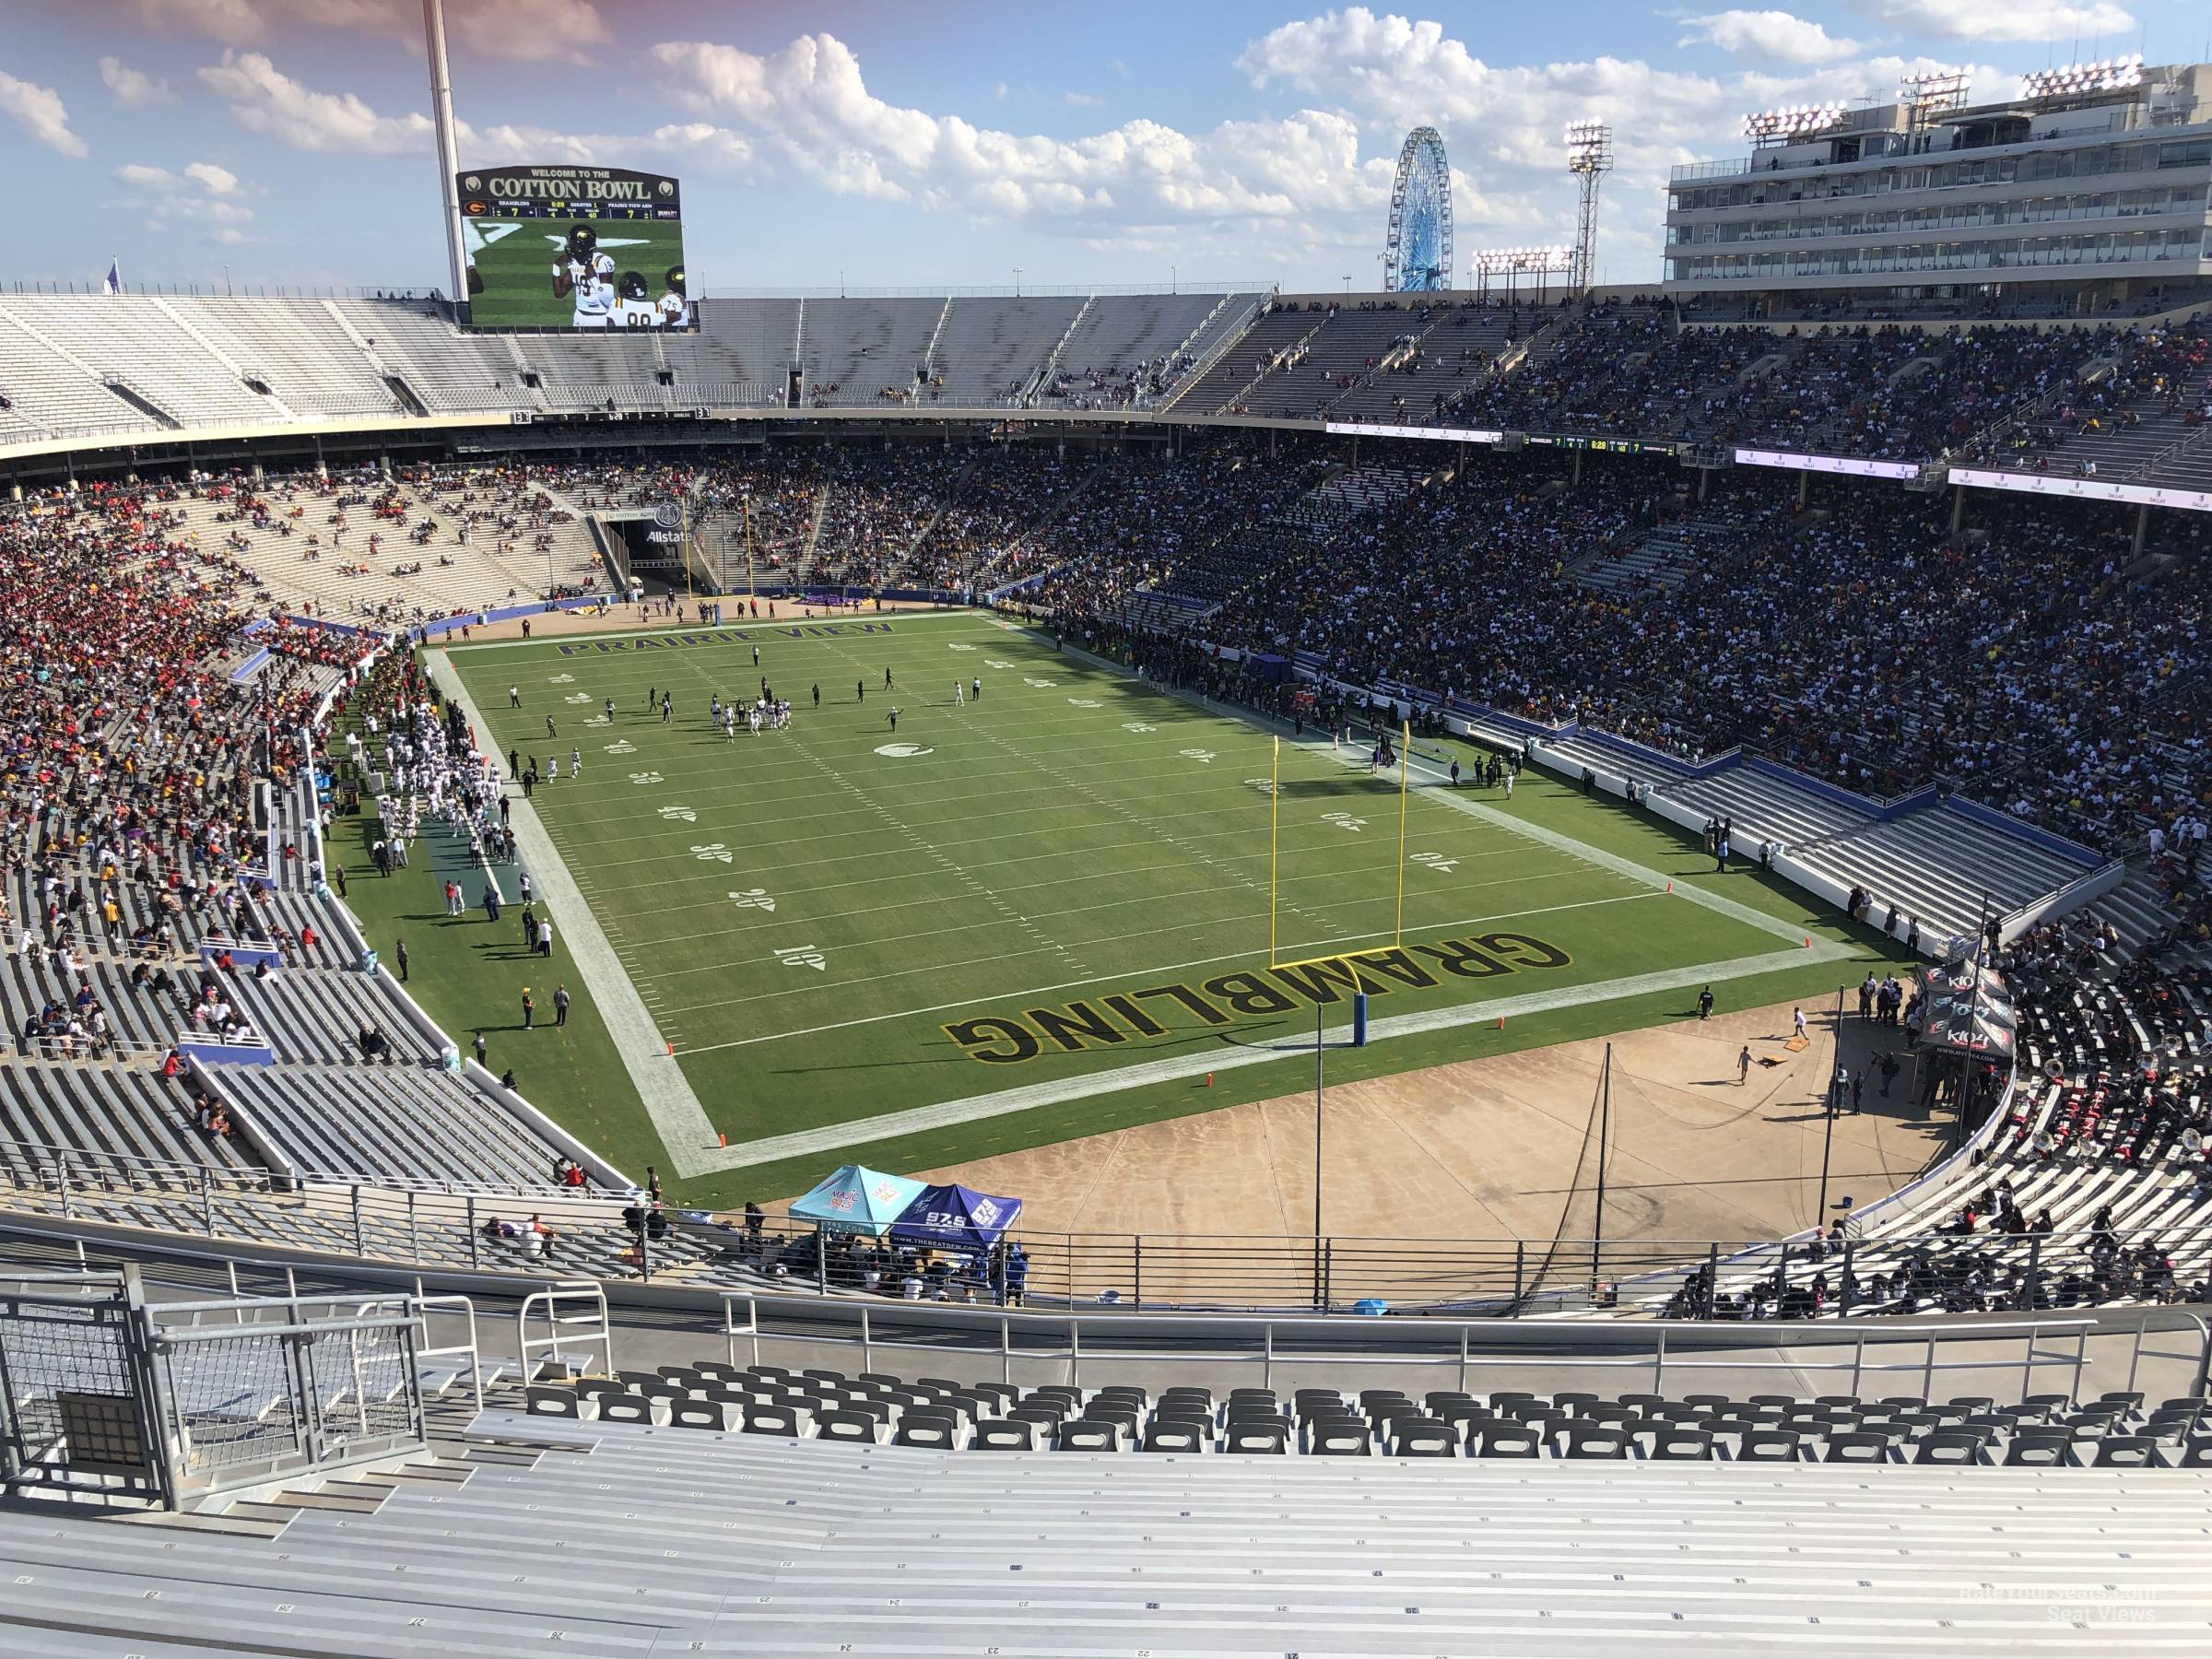 section 119, row 22 seat view  - cotton bowl